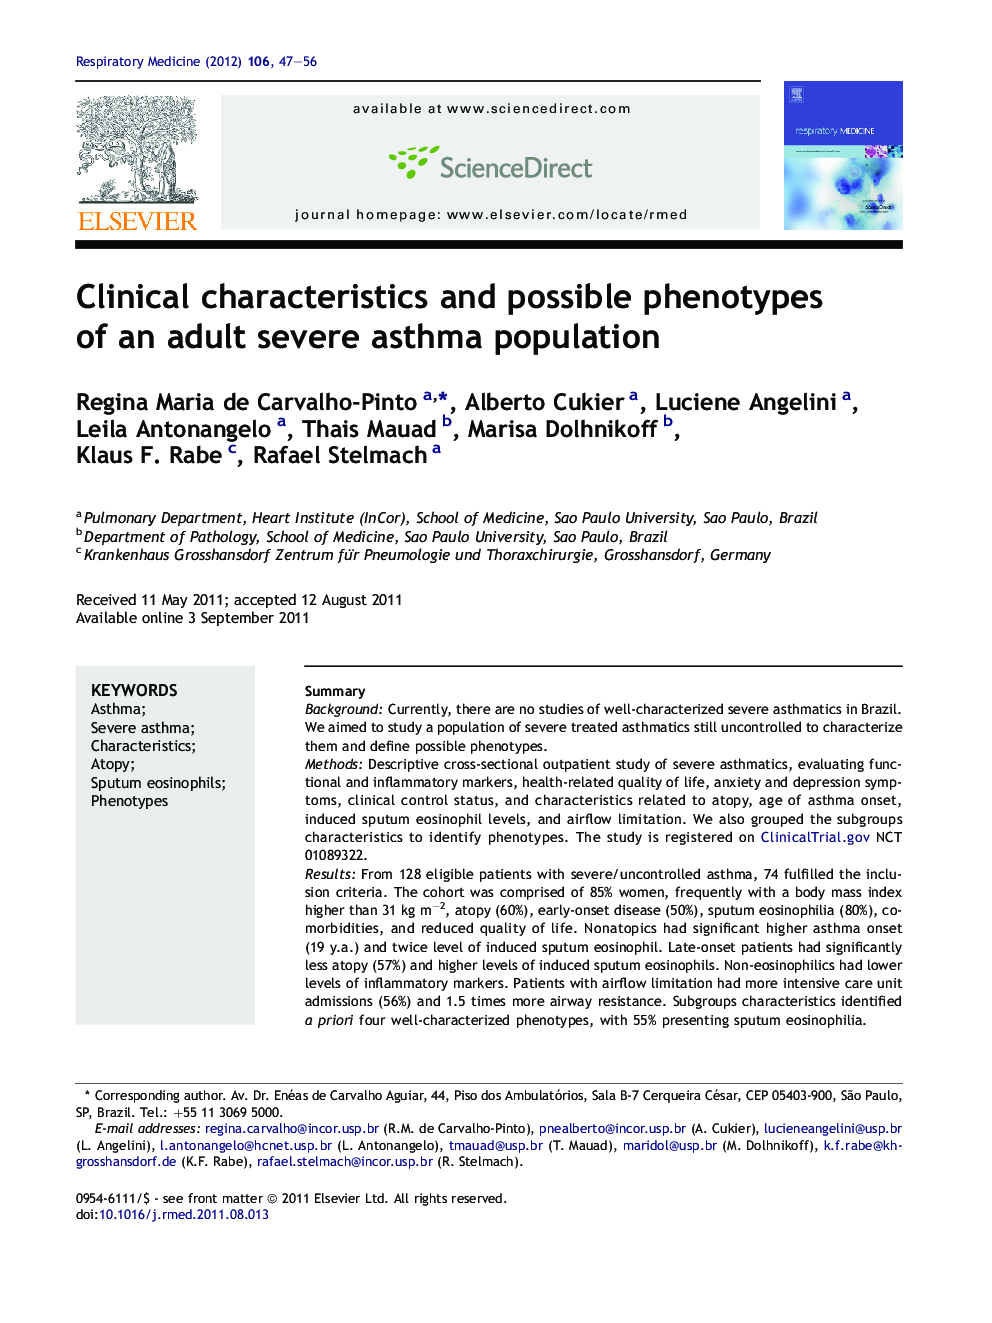 Clinical characteristics and possible phenotypes of an adult severe asthma population